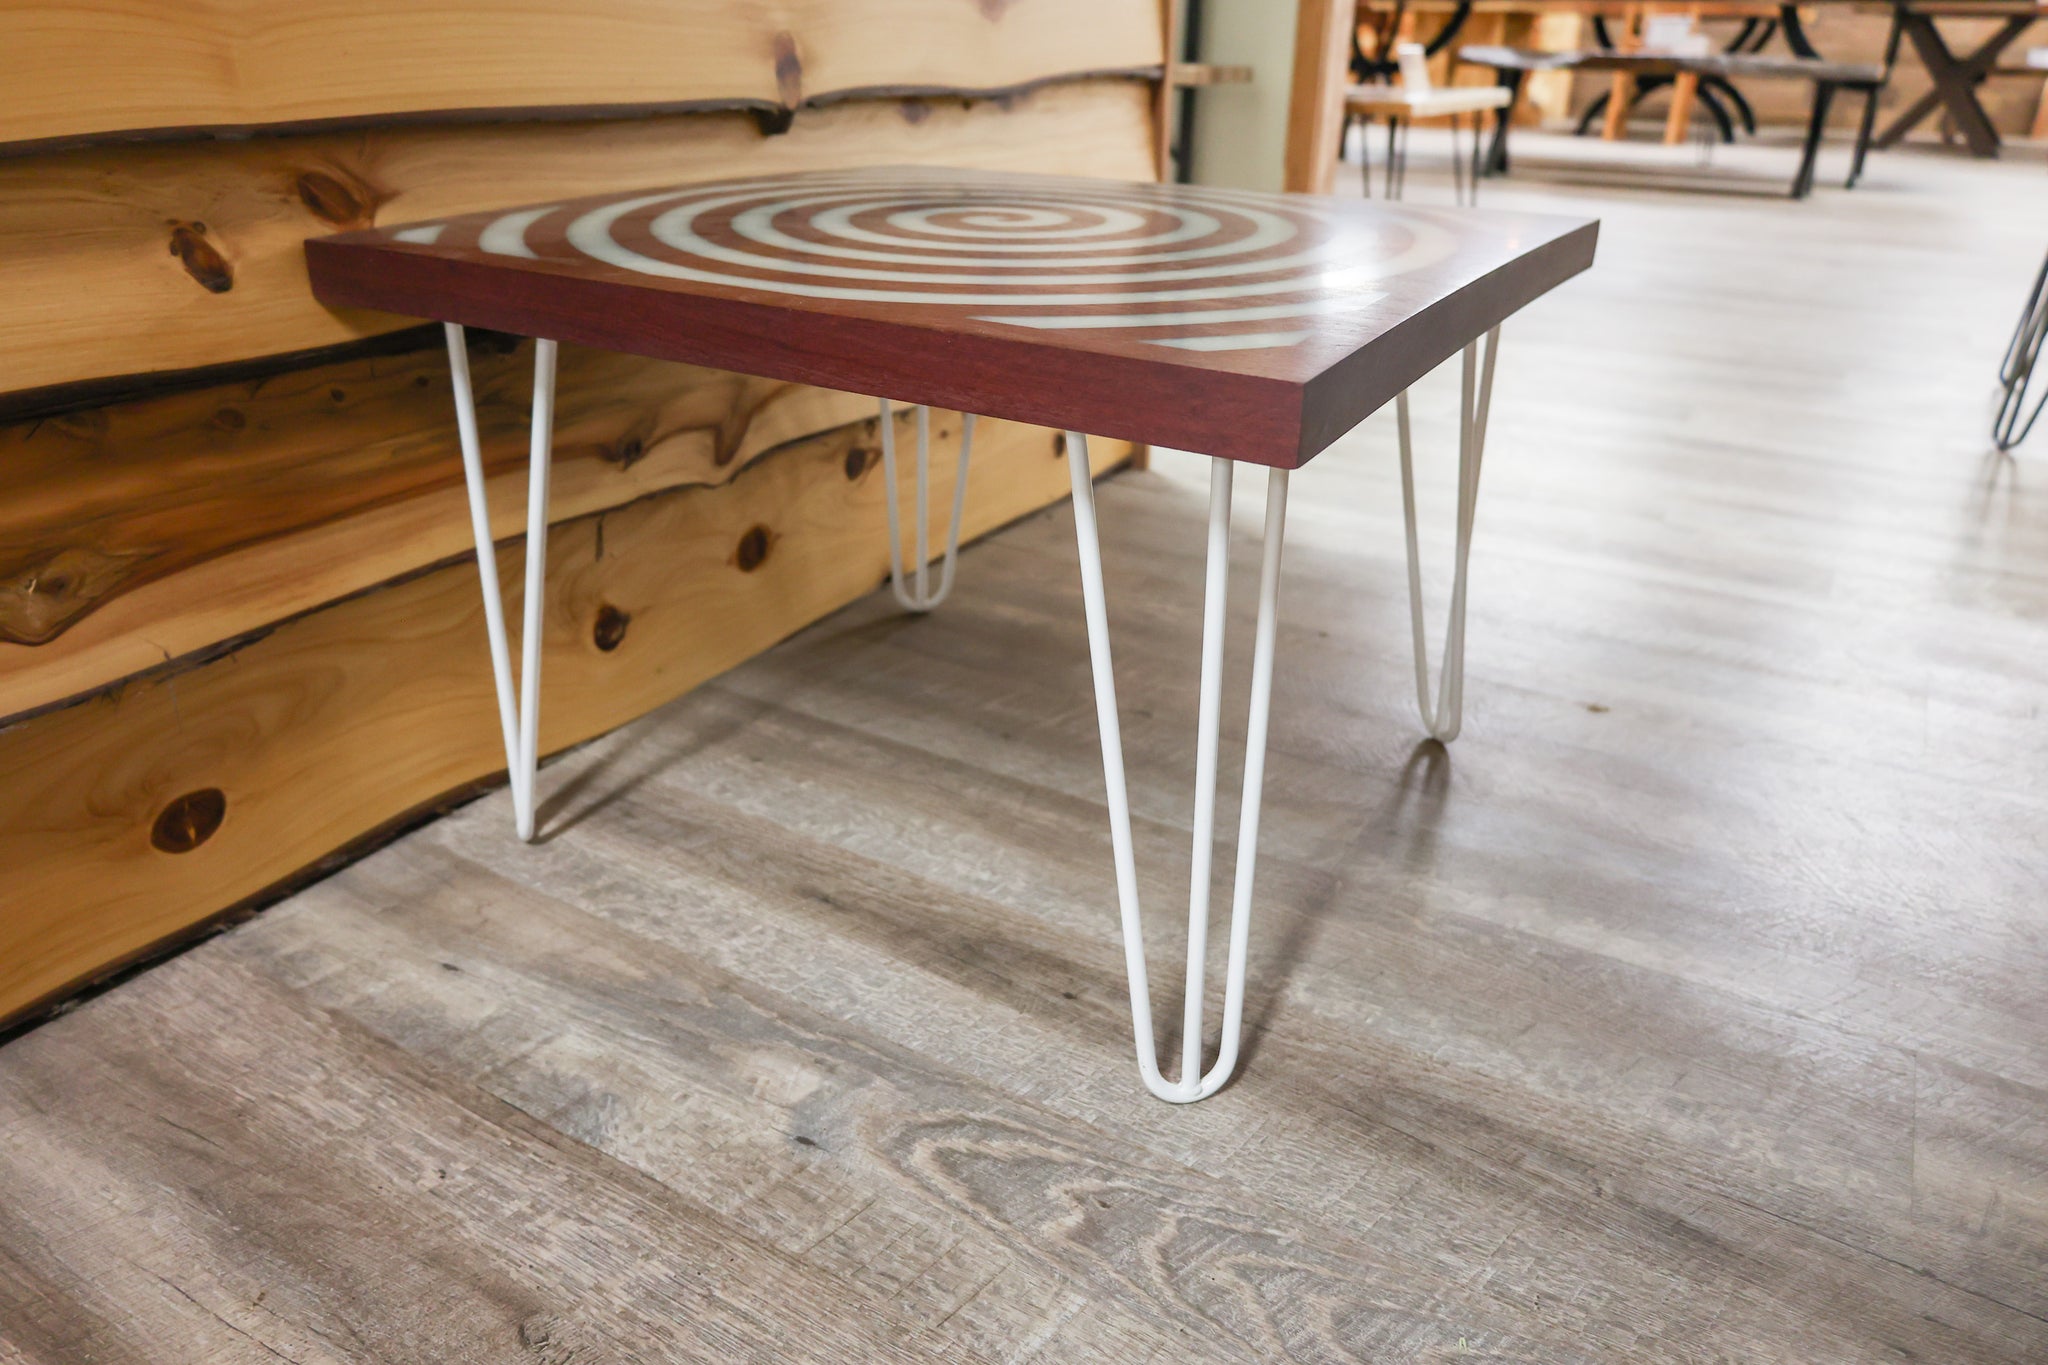 Purple Heart Spiral Table with White Hair Pin Legs - #94